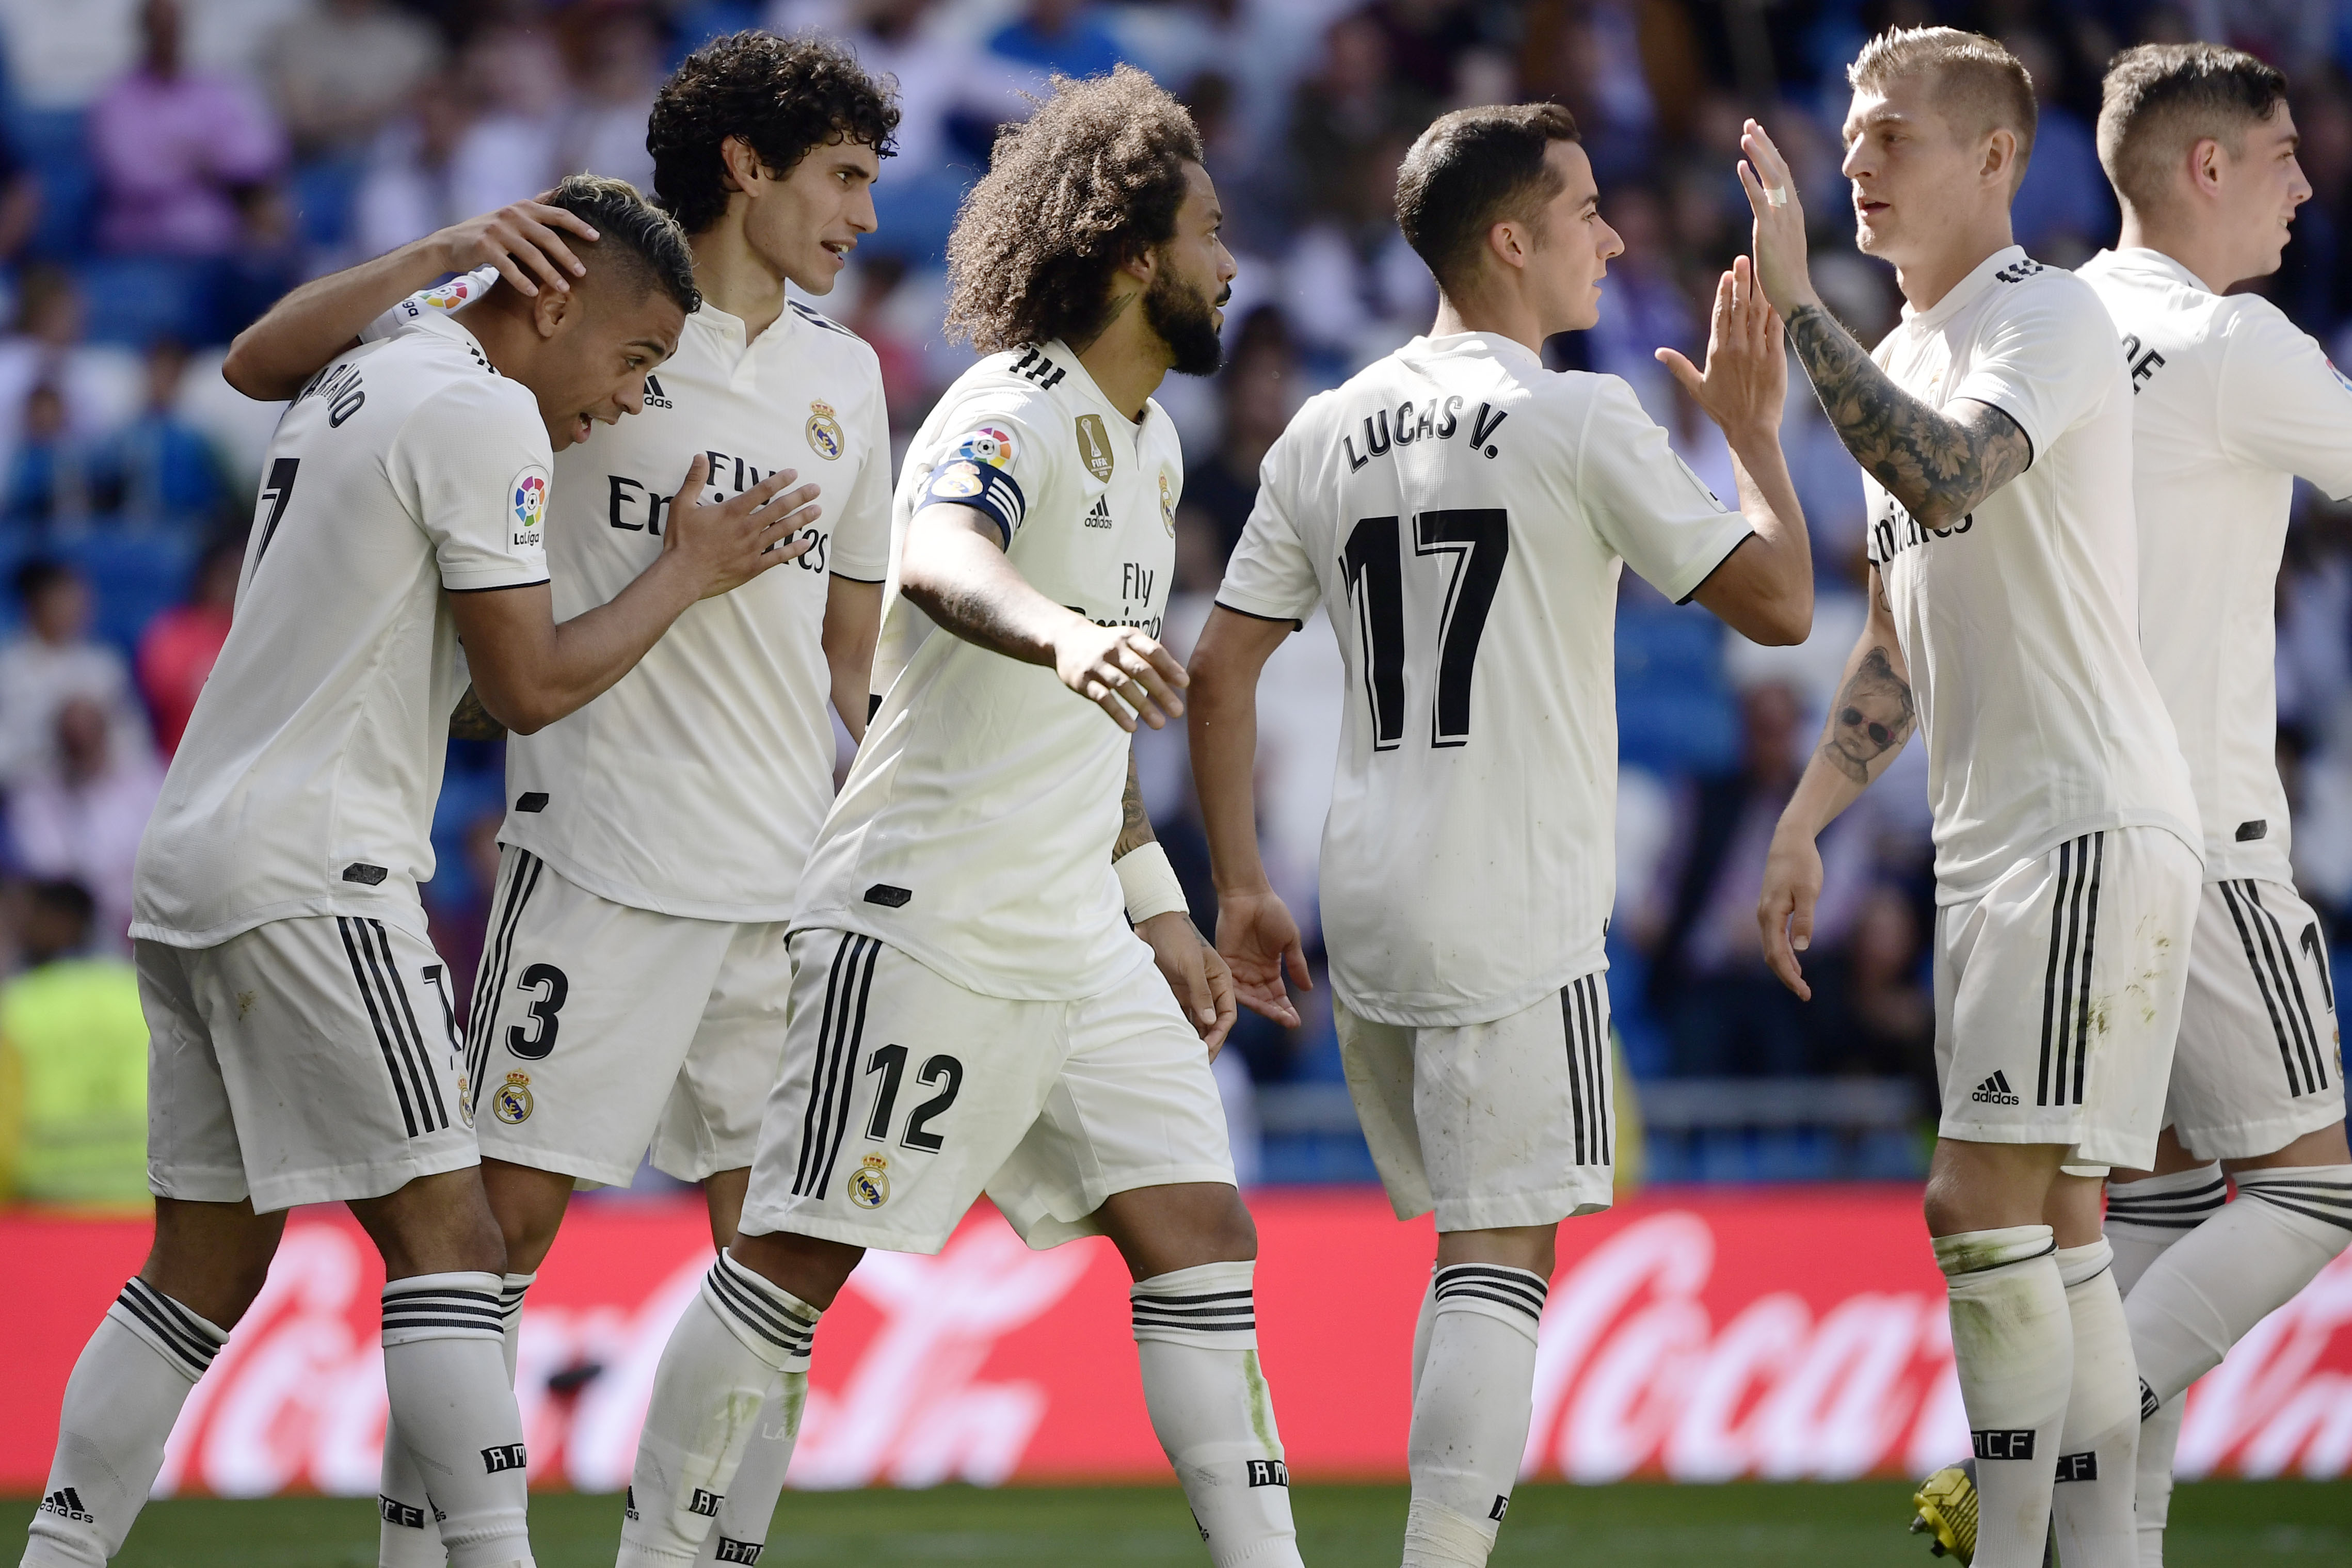 Real Madrid's Spanish-Dominican forward Mariano (L) celebrates his second goal with teammates during the Spanish league football match between Real Madrid CF and Villarreal CF at the Santiago Bernabeu stadium in Madrid on May 5, 2019. (Photo by JAVIER SORIANO / AFP)        (Photo credit should read JAVIER SORIANO/AFP/Getty Images)